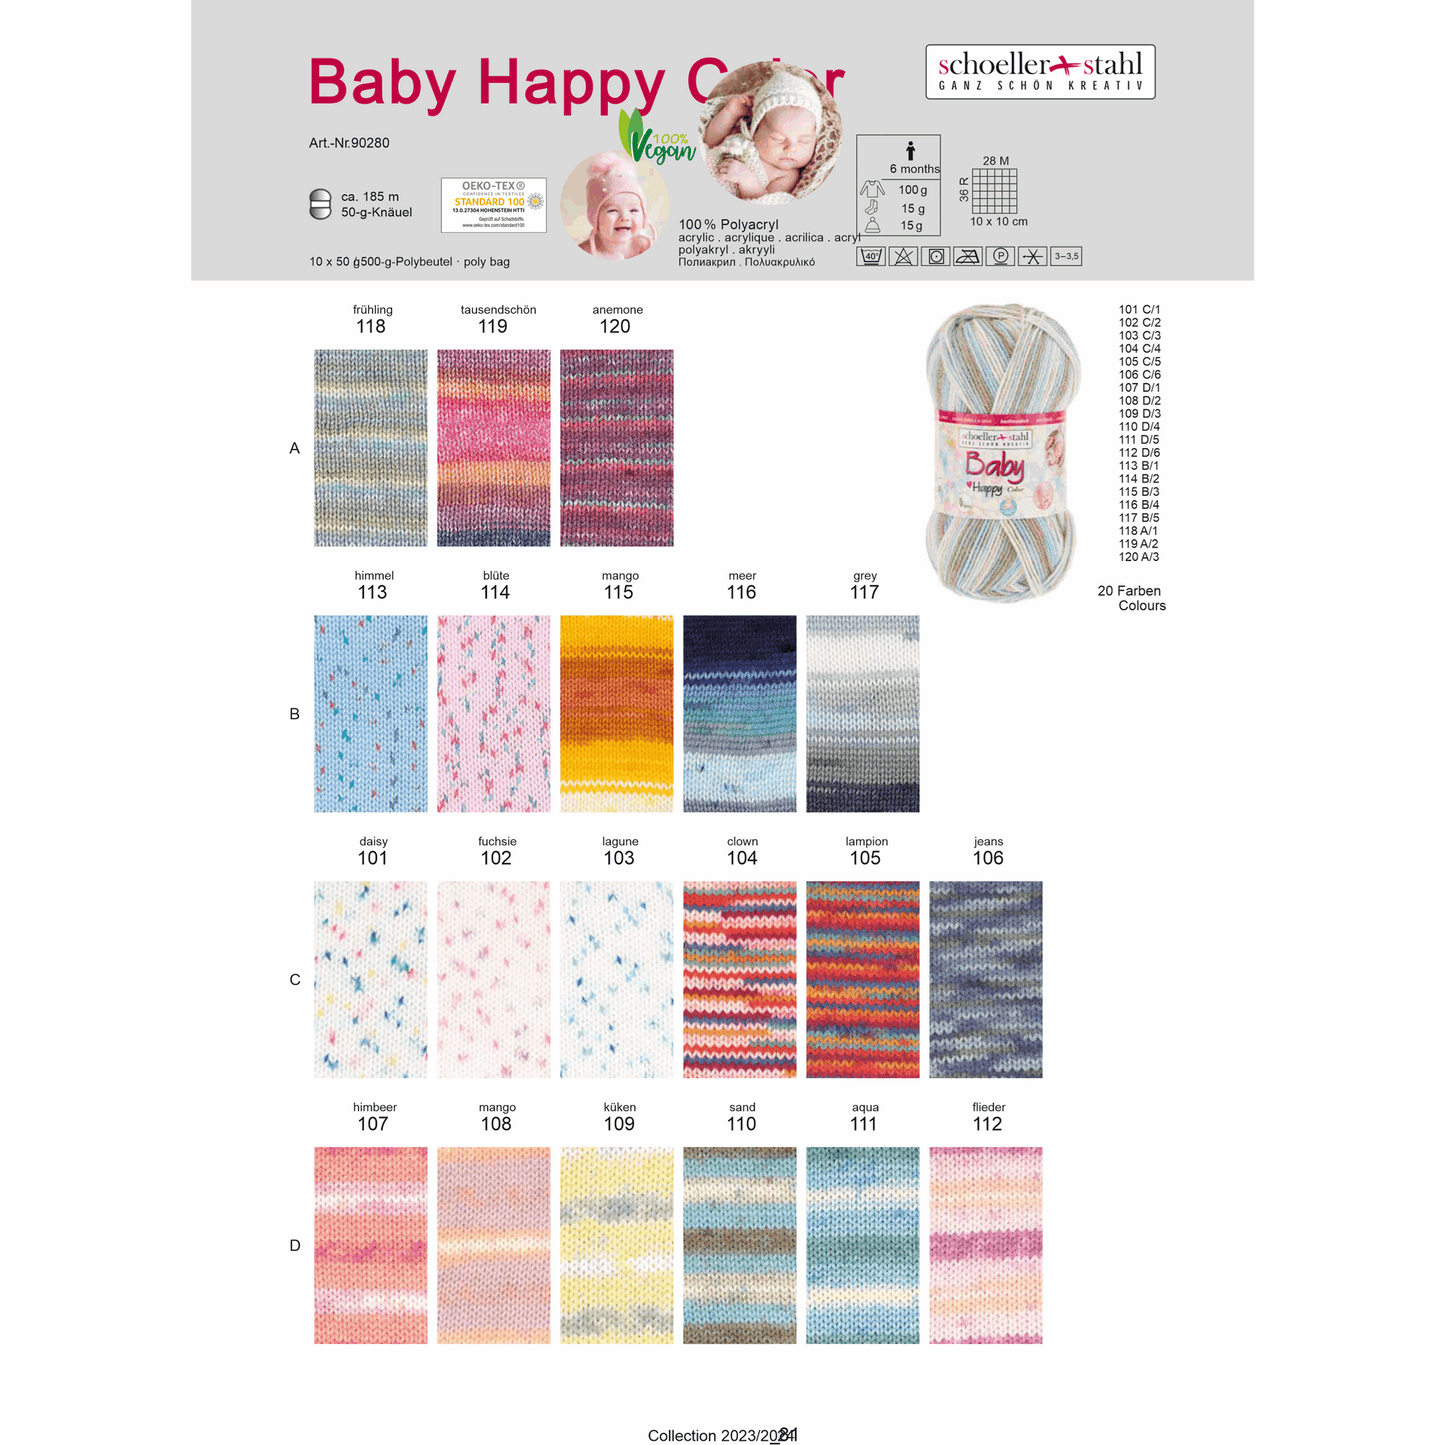 Baby happy color 50g, 90280, Farbe 113, himmel